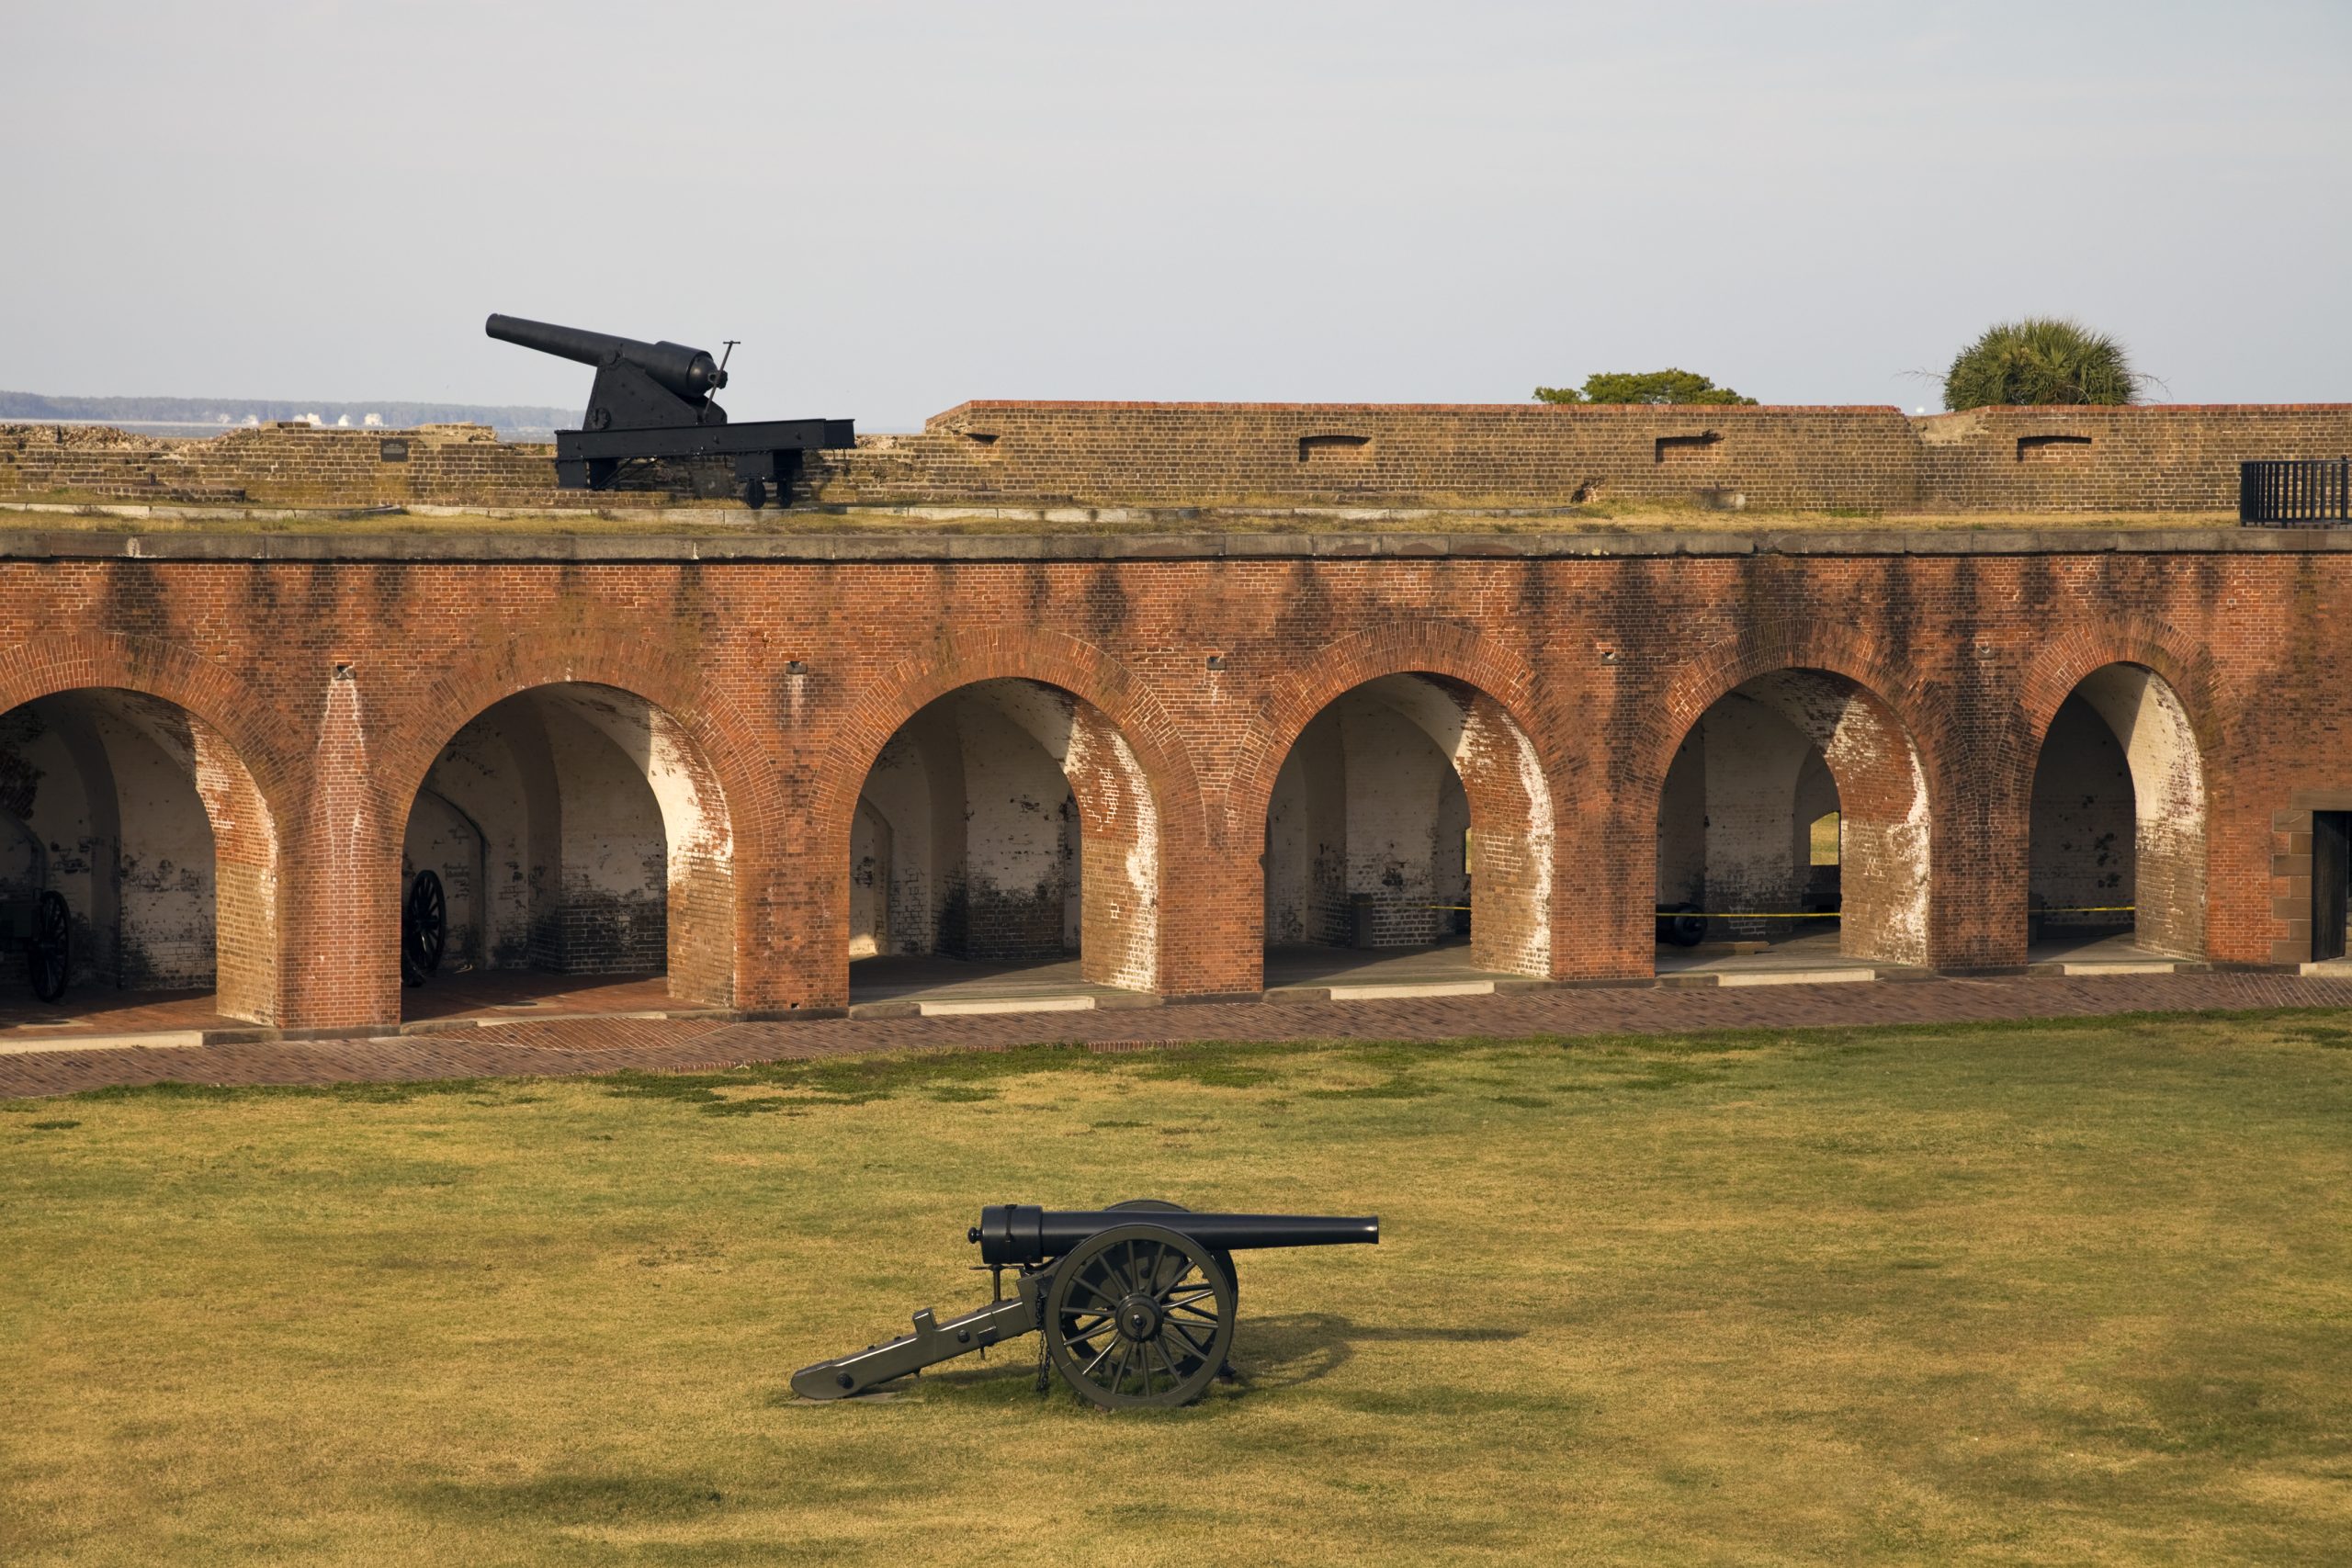 Cannons in Fort Pulaski